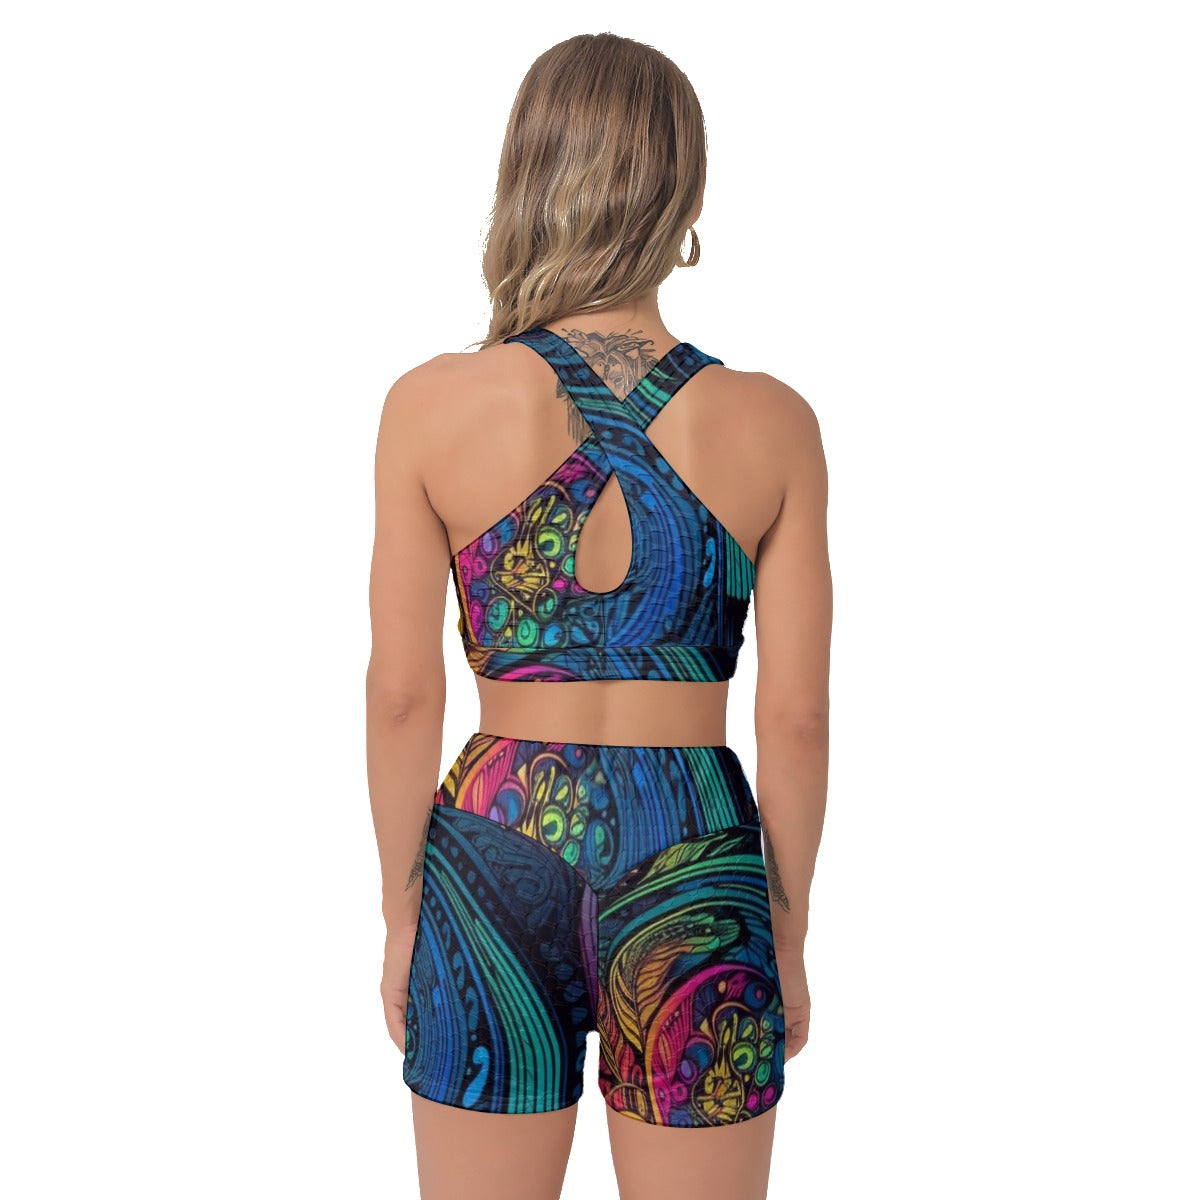 All-Over Print Women's Sports Bra Suit